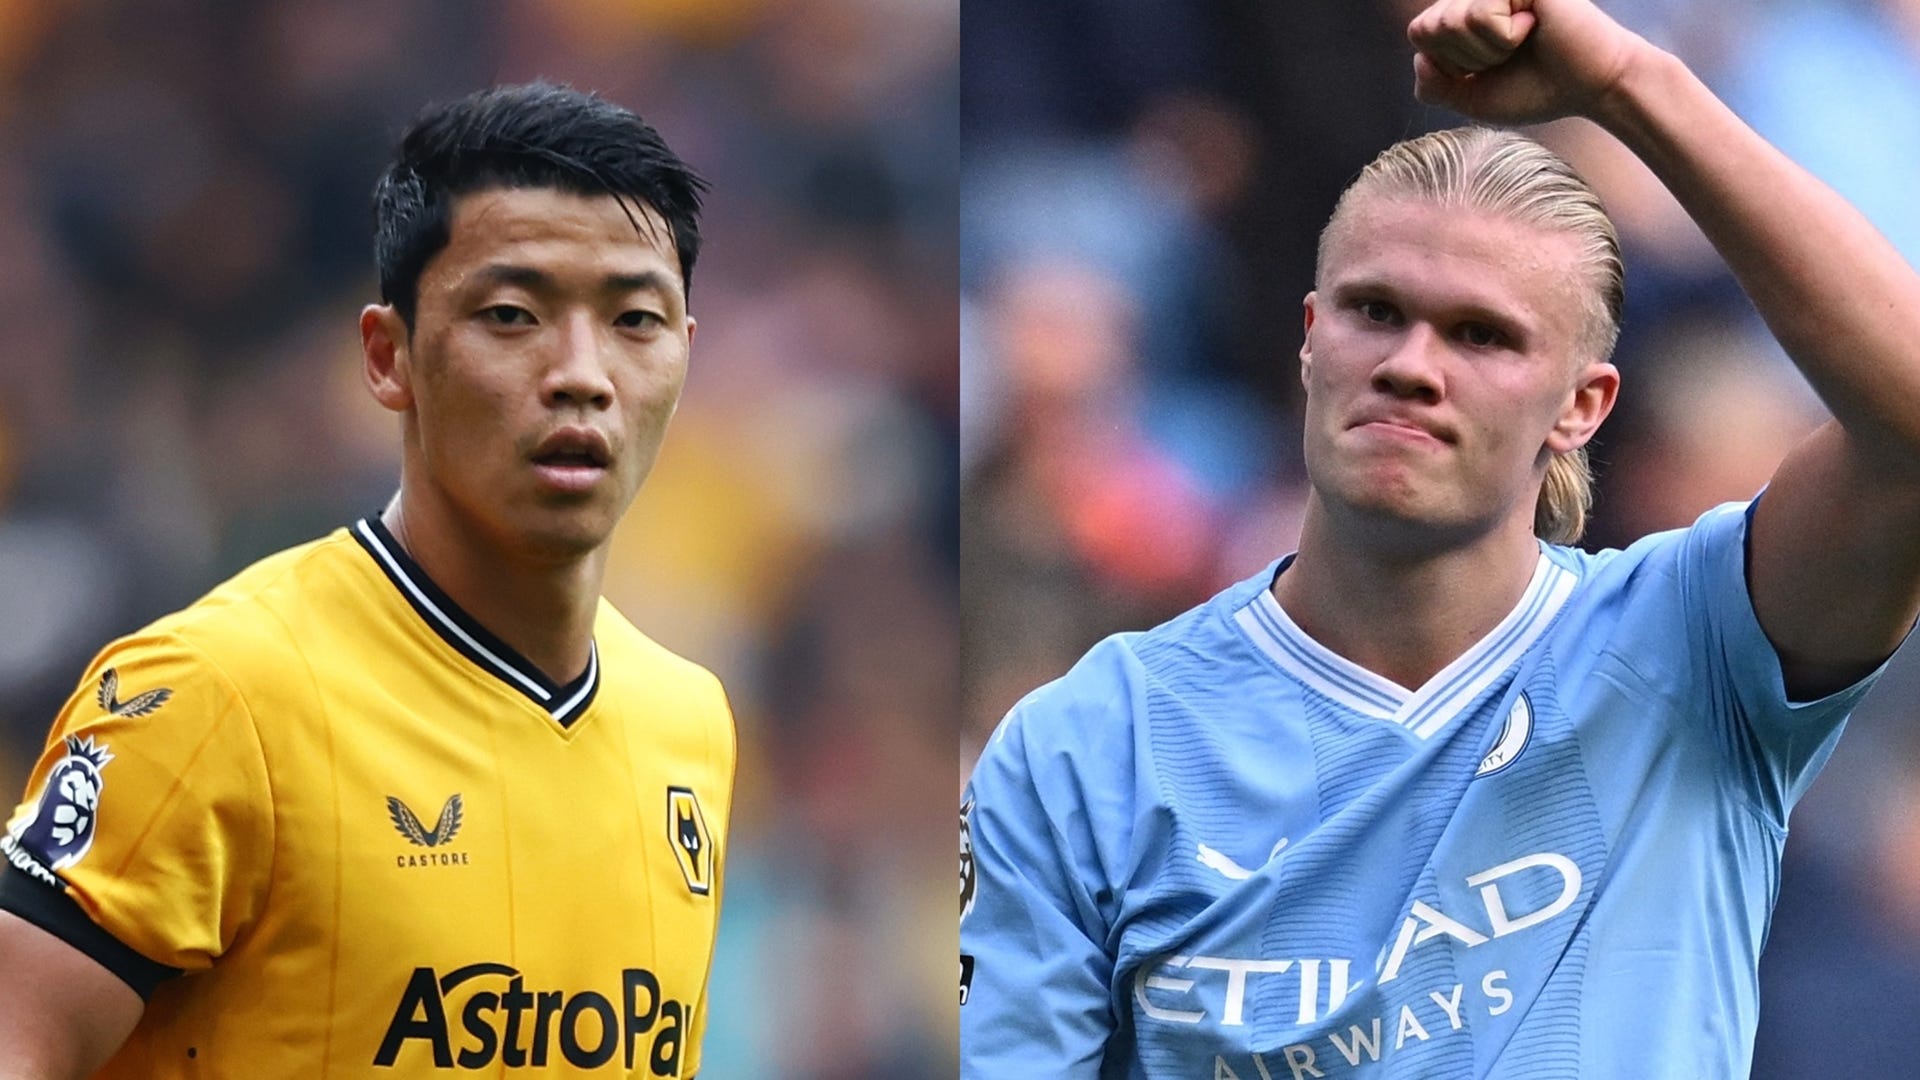 Wolves vs Man City Where to watch the match online, live stream, TV channels and kick-off time Goal UK